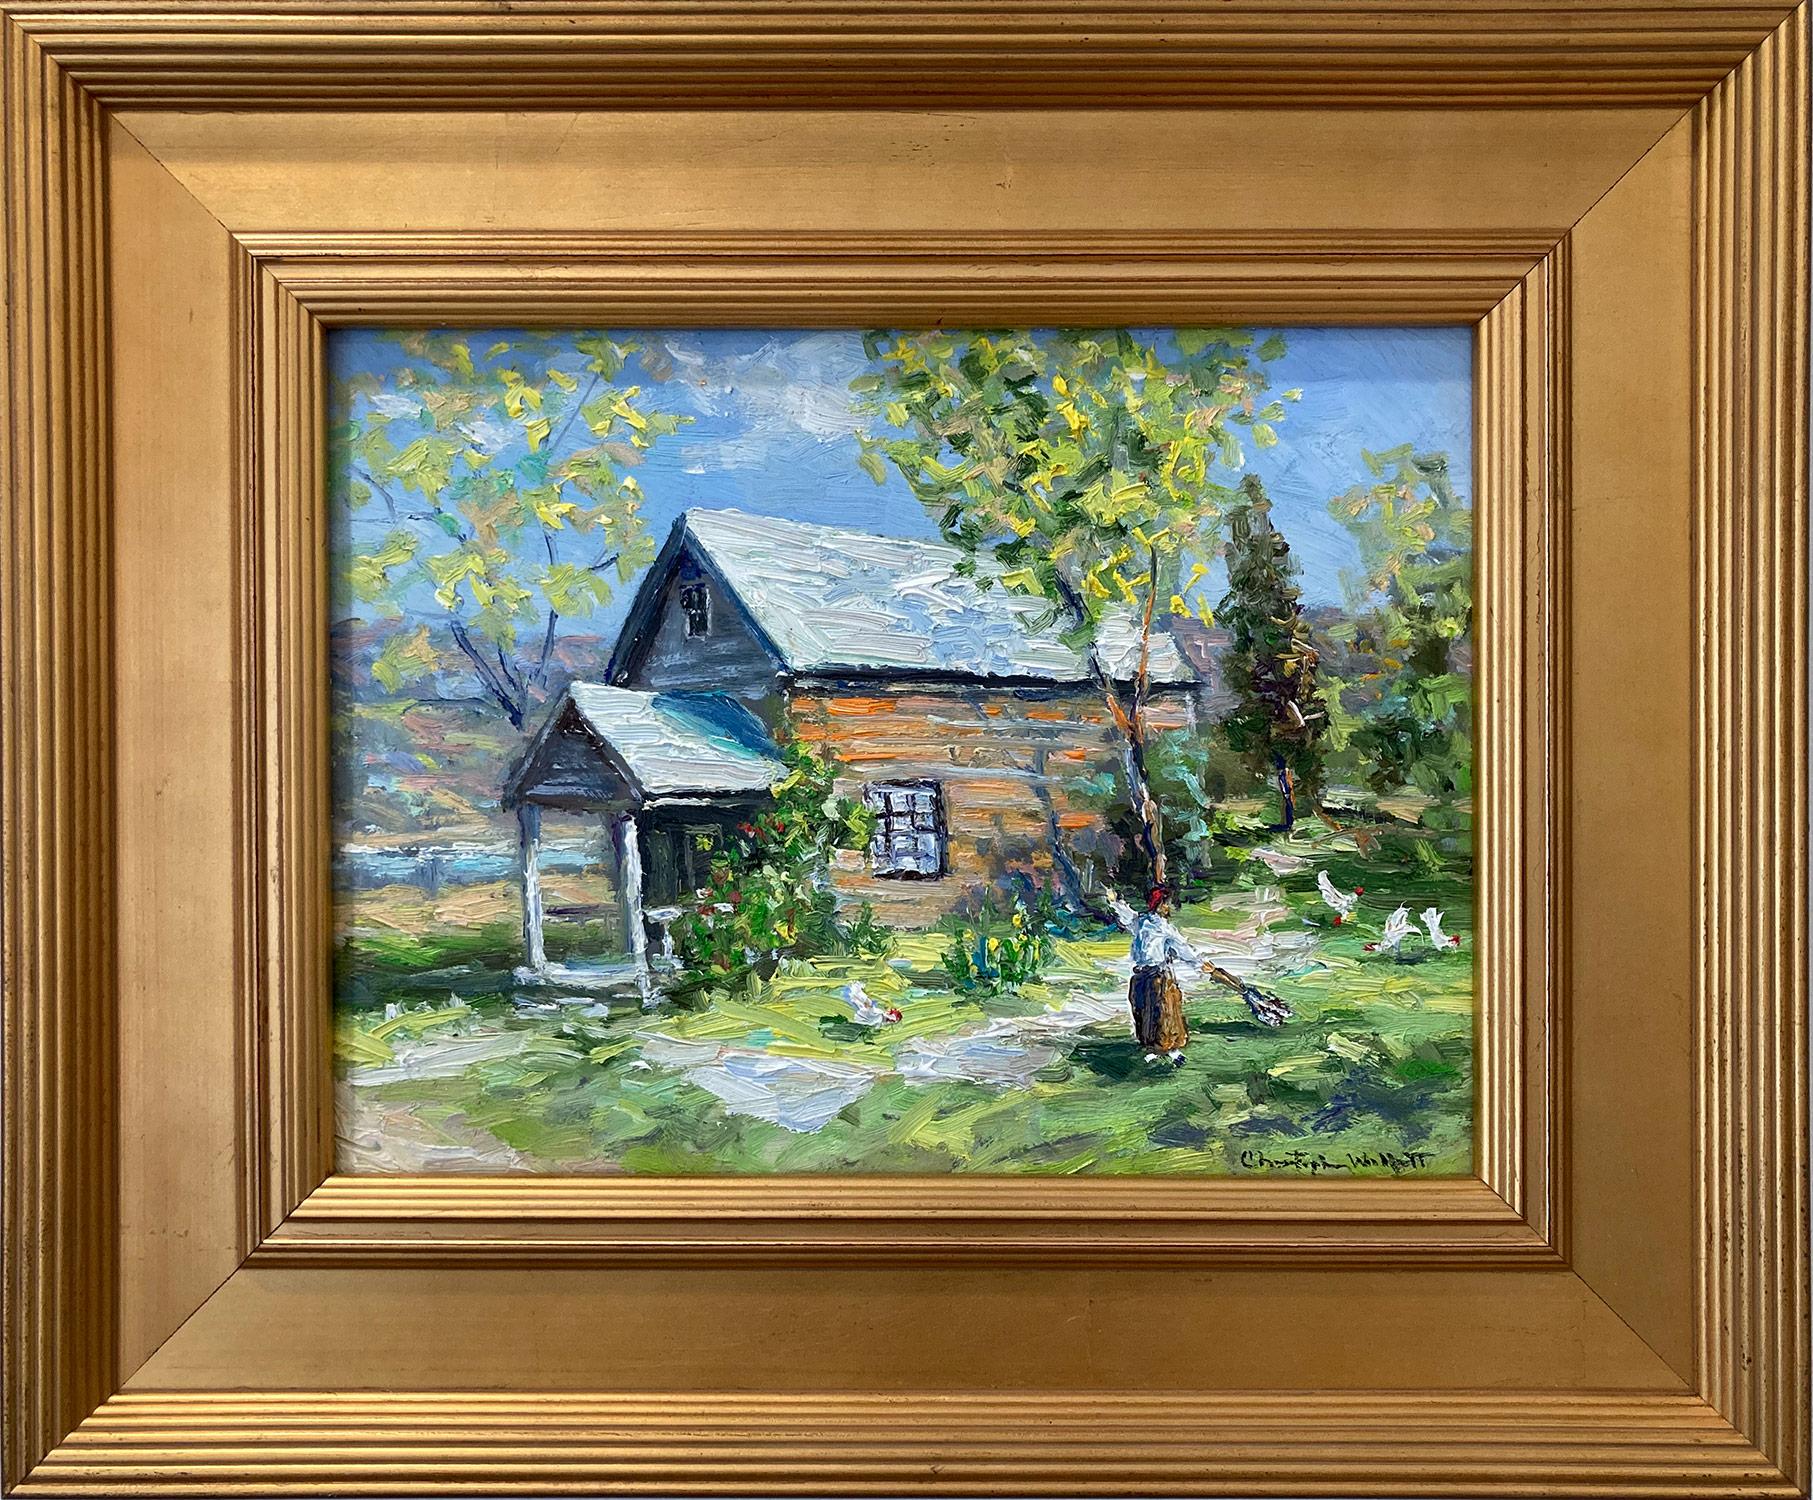 "Sunday Spring Cleaning" Point Pleasant Bucks County Landscape Oil Painting